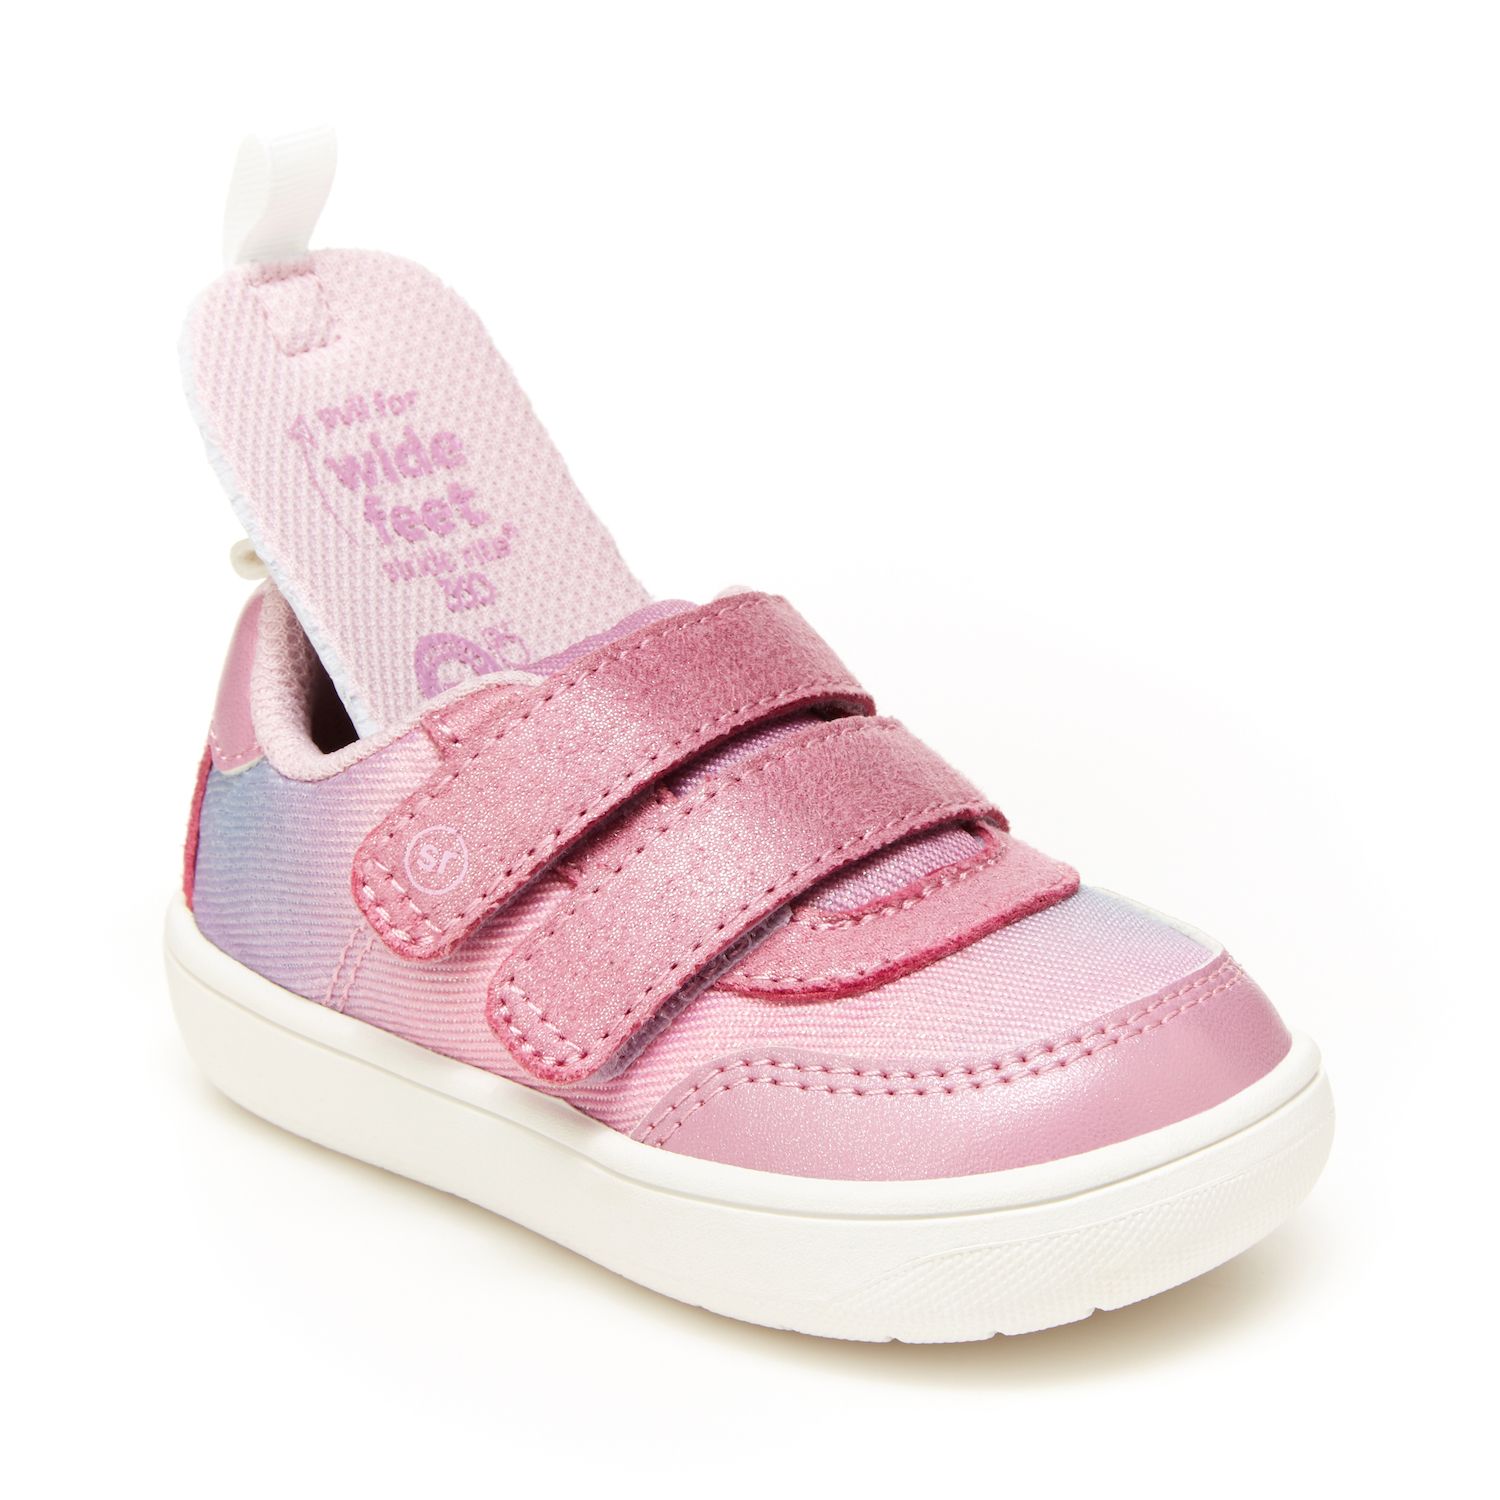 Baby Girls Trainers Non Slip Kids Toddler Little Girl Sneakers First Walking Shoes for Crib Daily Casual Outdoor Lightweight Breathable Cute Sweet